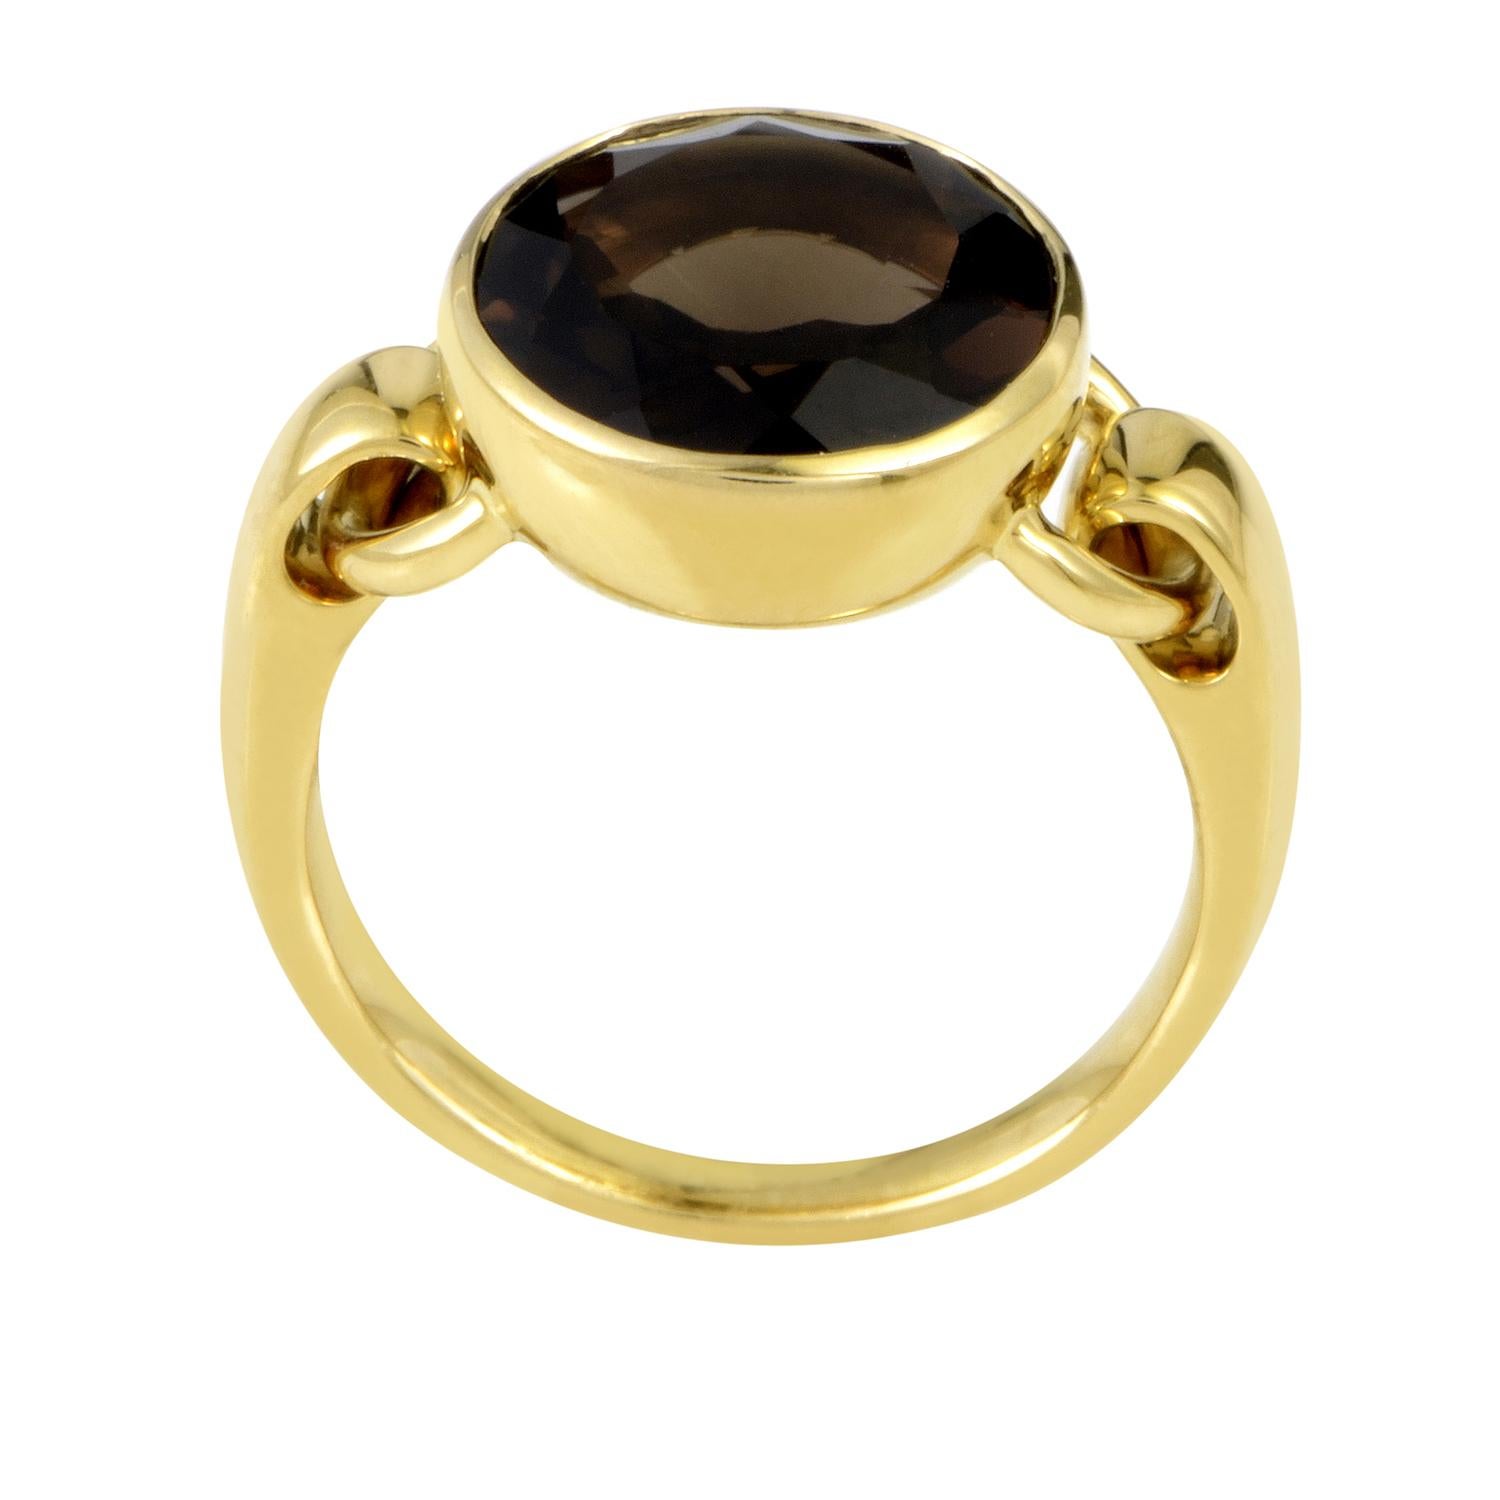 Set upon a gracefully shaped body made of 18K yellow gold that exudes classic elegance and tasteful luxury, the smoky quartz in this astonishing ring from Poiray weighs 3.50 carats and offers a majestic look.
